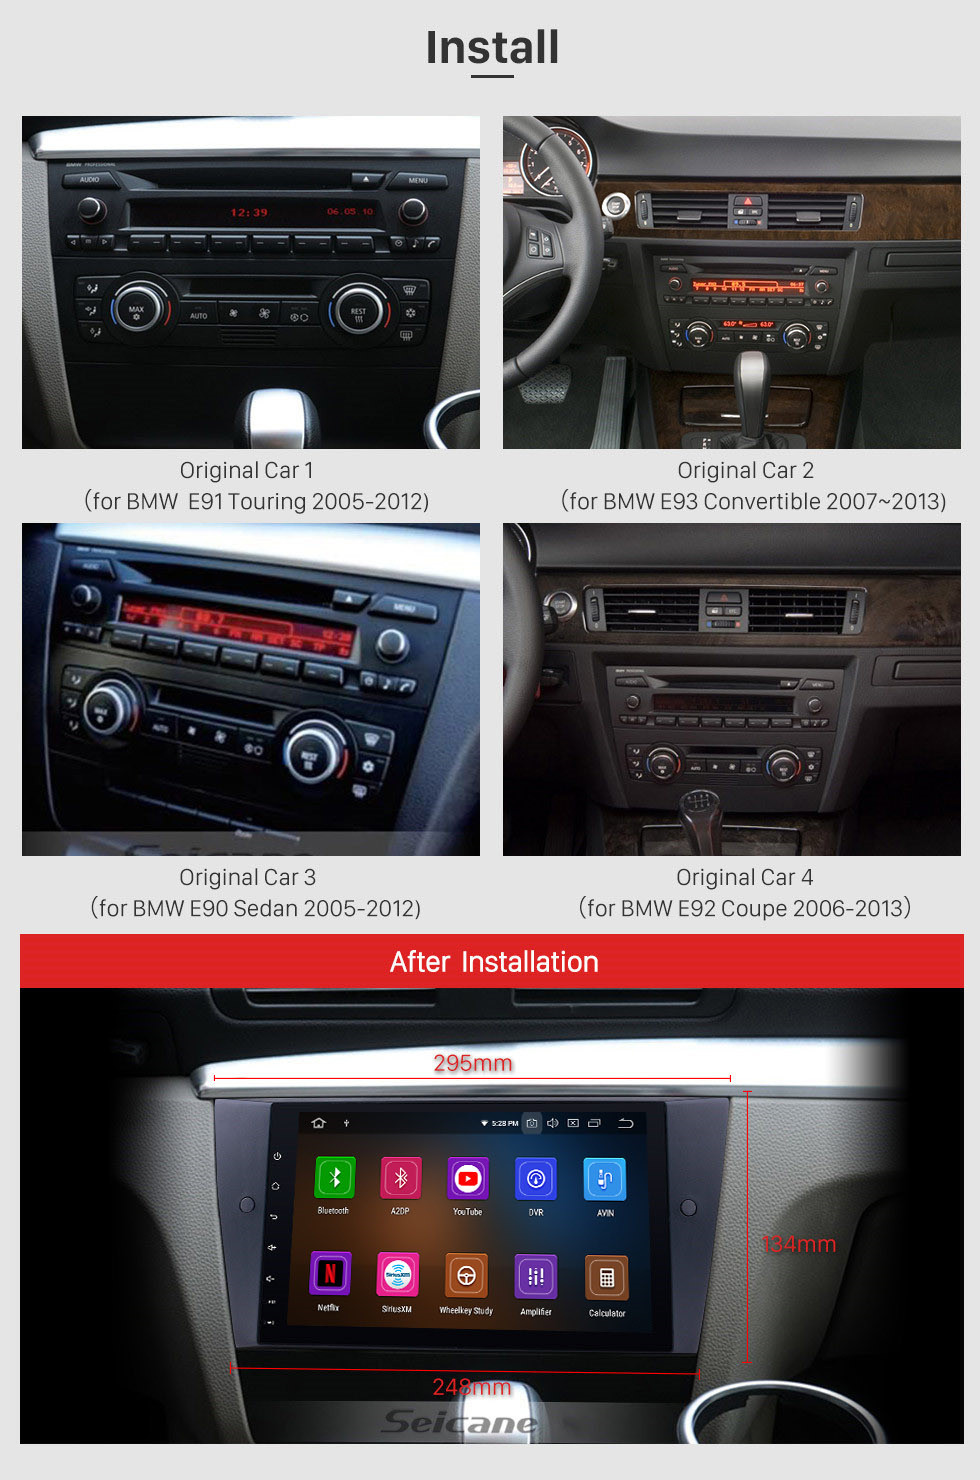 Seicane Android 13.0 9 inch HD Touchscreen Radio for 2005-2012 BMW 3 Series E90 E91 E92 E93 316i 318i 320i 320si 323i 325i 328i 330i 335i 335is M3 316d 318d 320d 325d 330d 335d with GPS Navigation system WIFI tv bluetooth usb